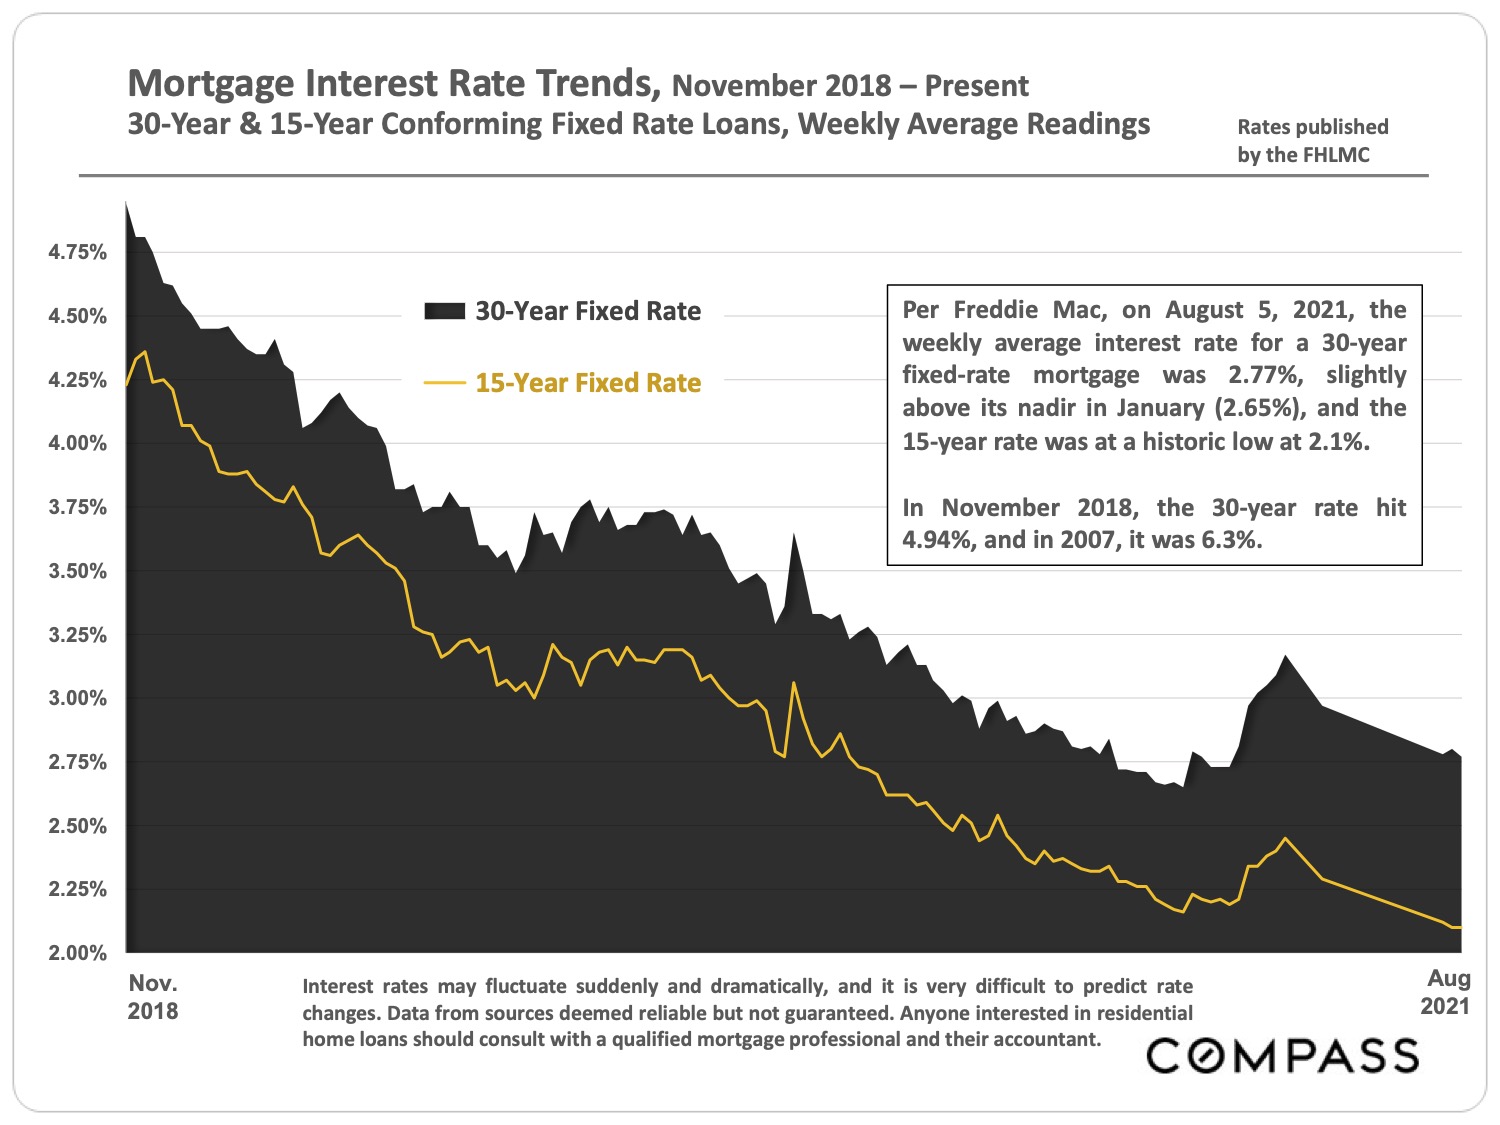 Image of Mortgage Interest Rate Trends from November 2018 to Present 30 Year & 15 Year Conforming Fixed Rate Loans Weekly Average Readings